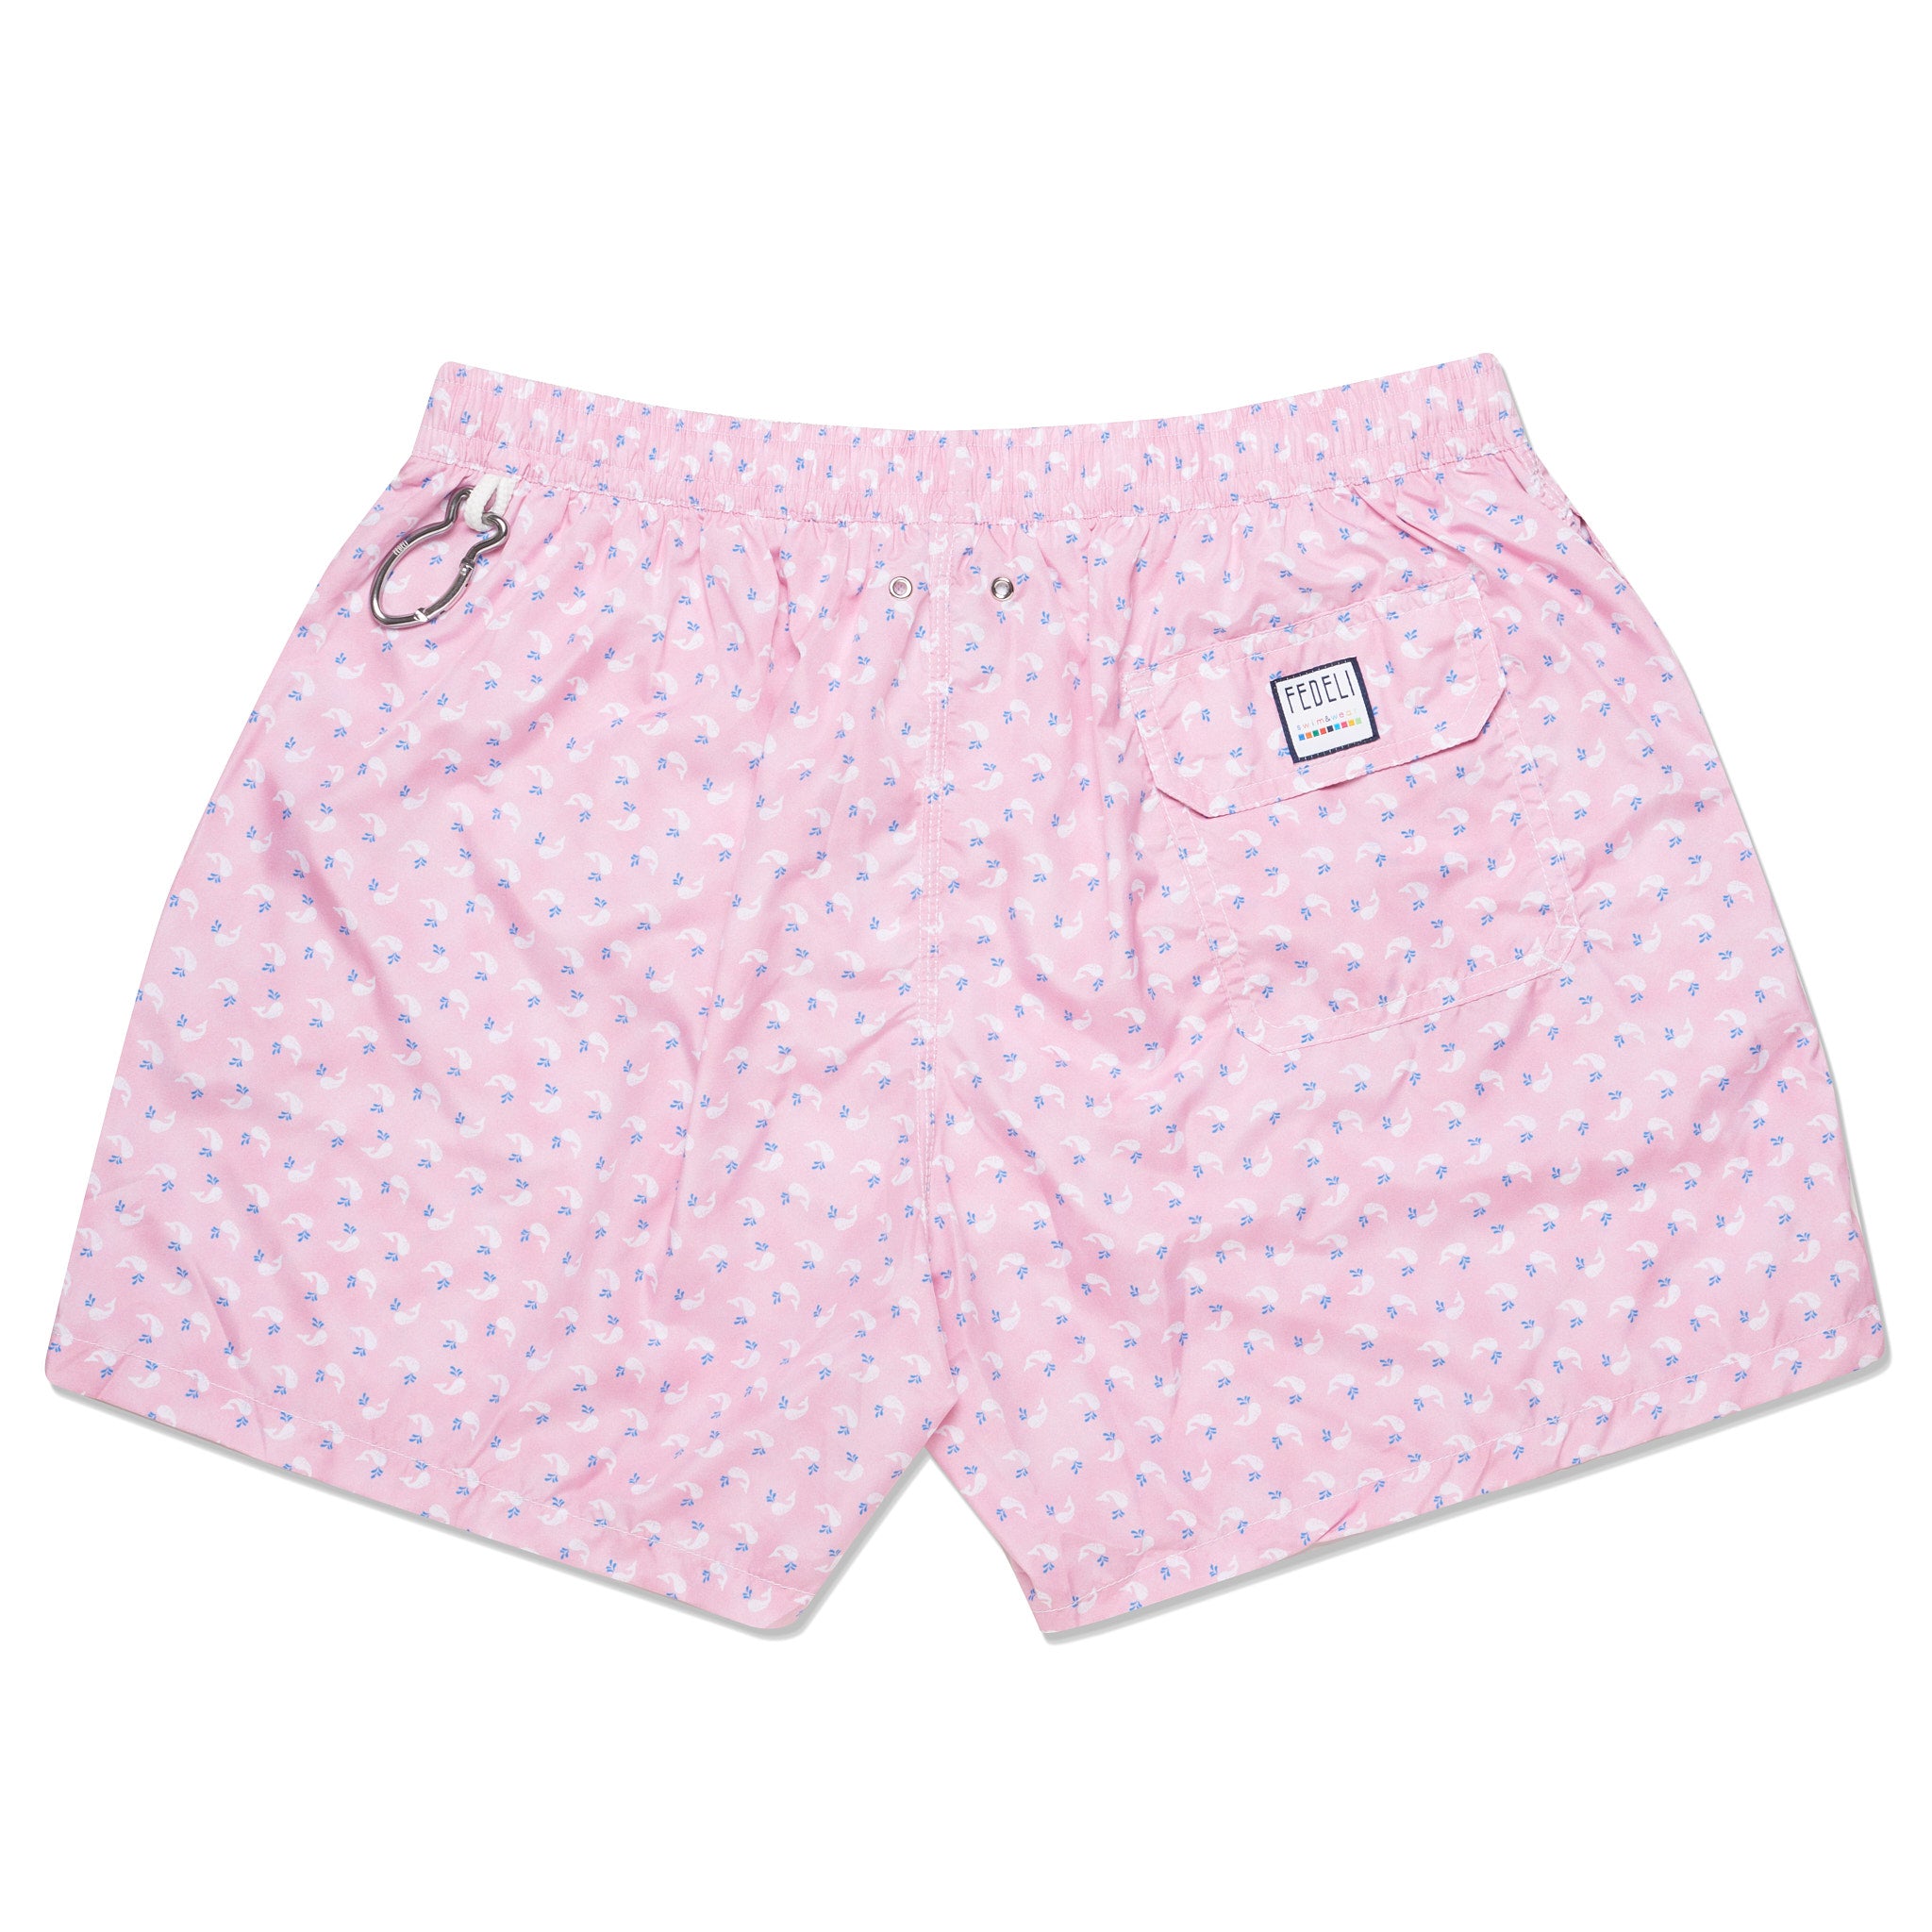 FEDELI Pink Whale Printed Madeira Airstop Swim Shorts Trunks NEW Size 3XL FEDELI